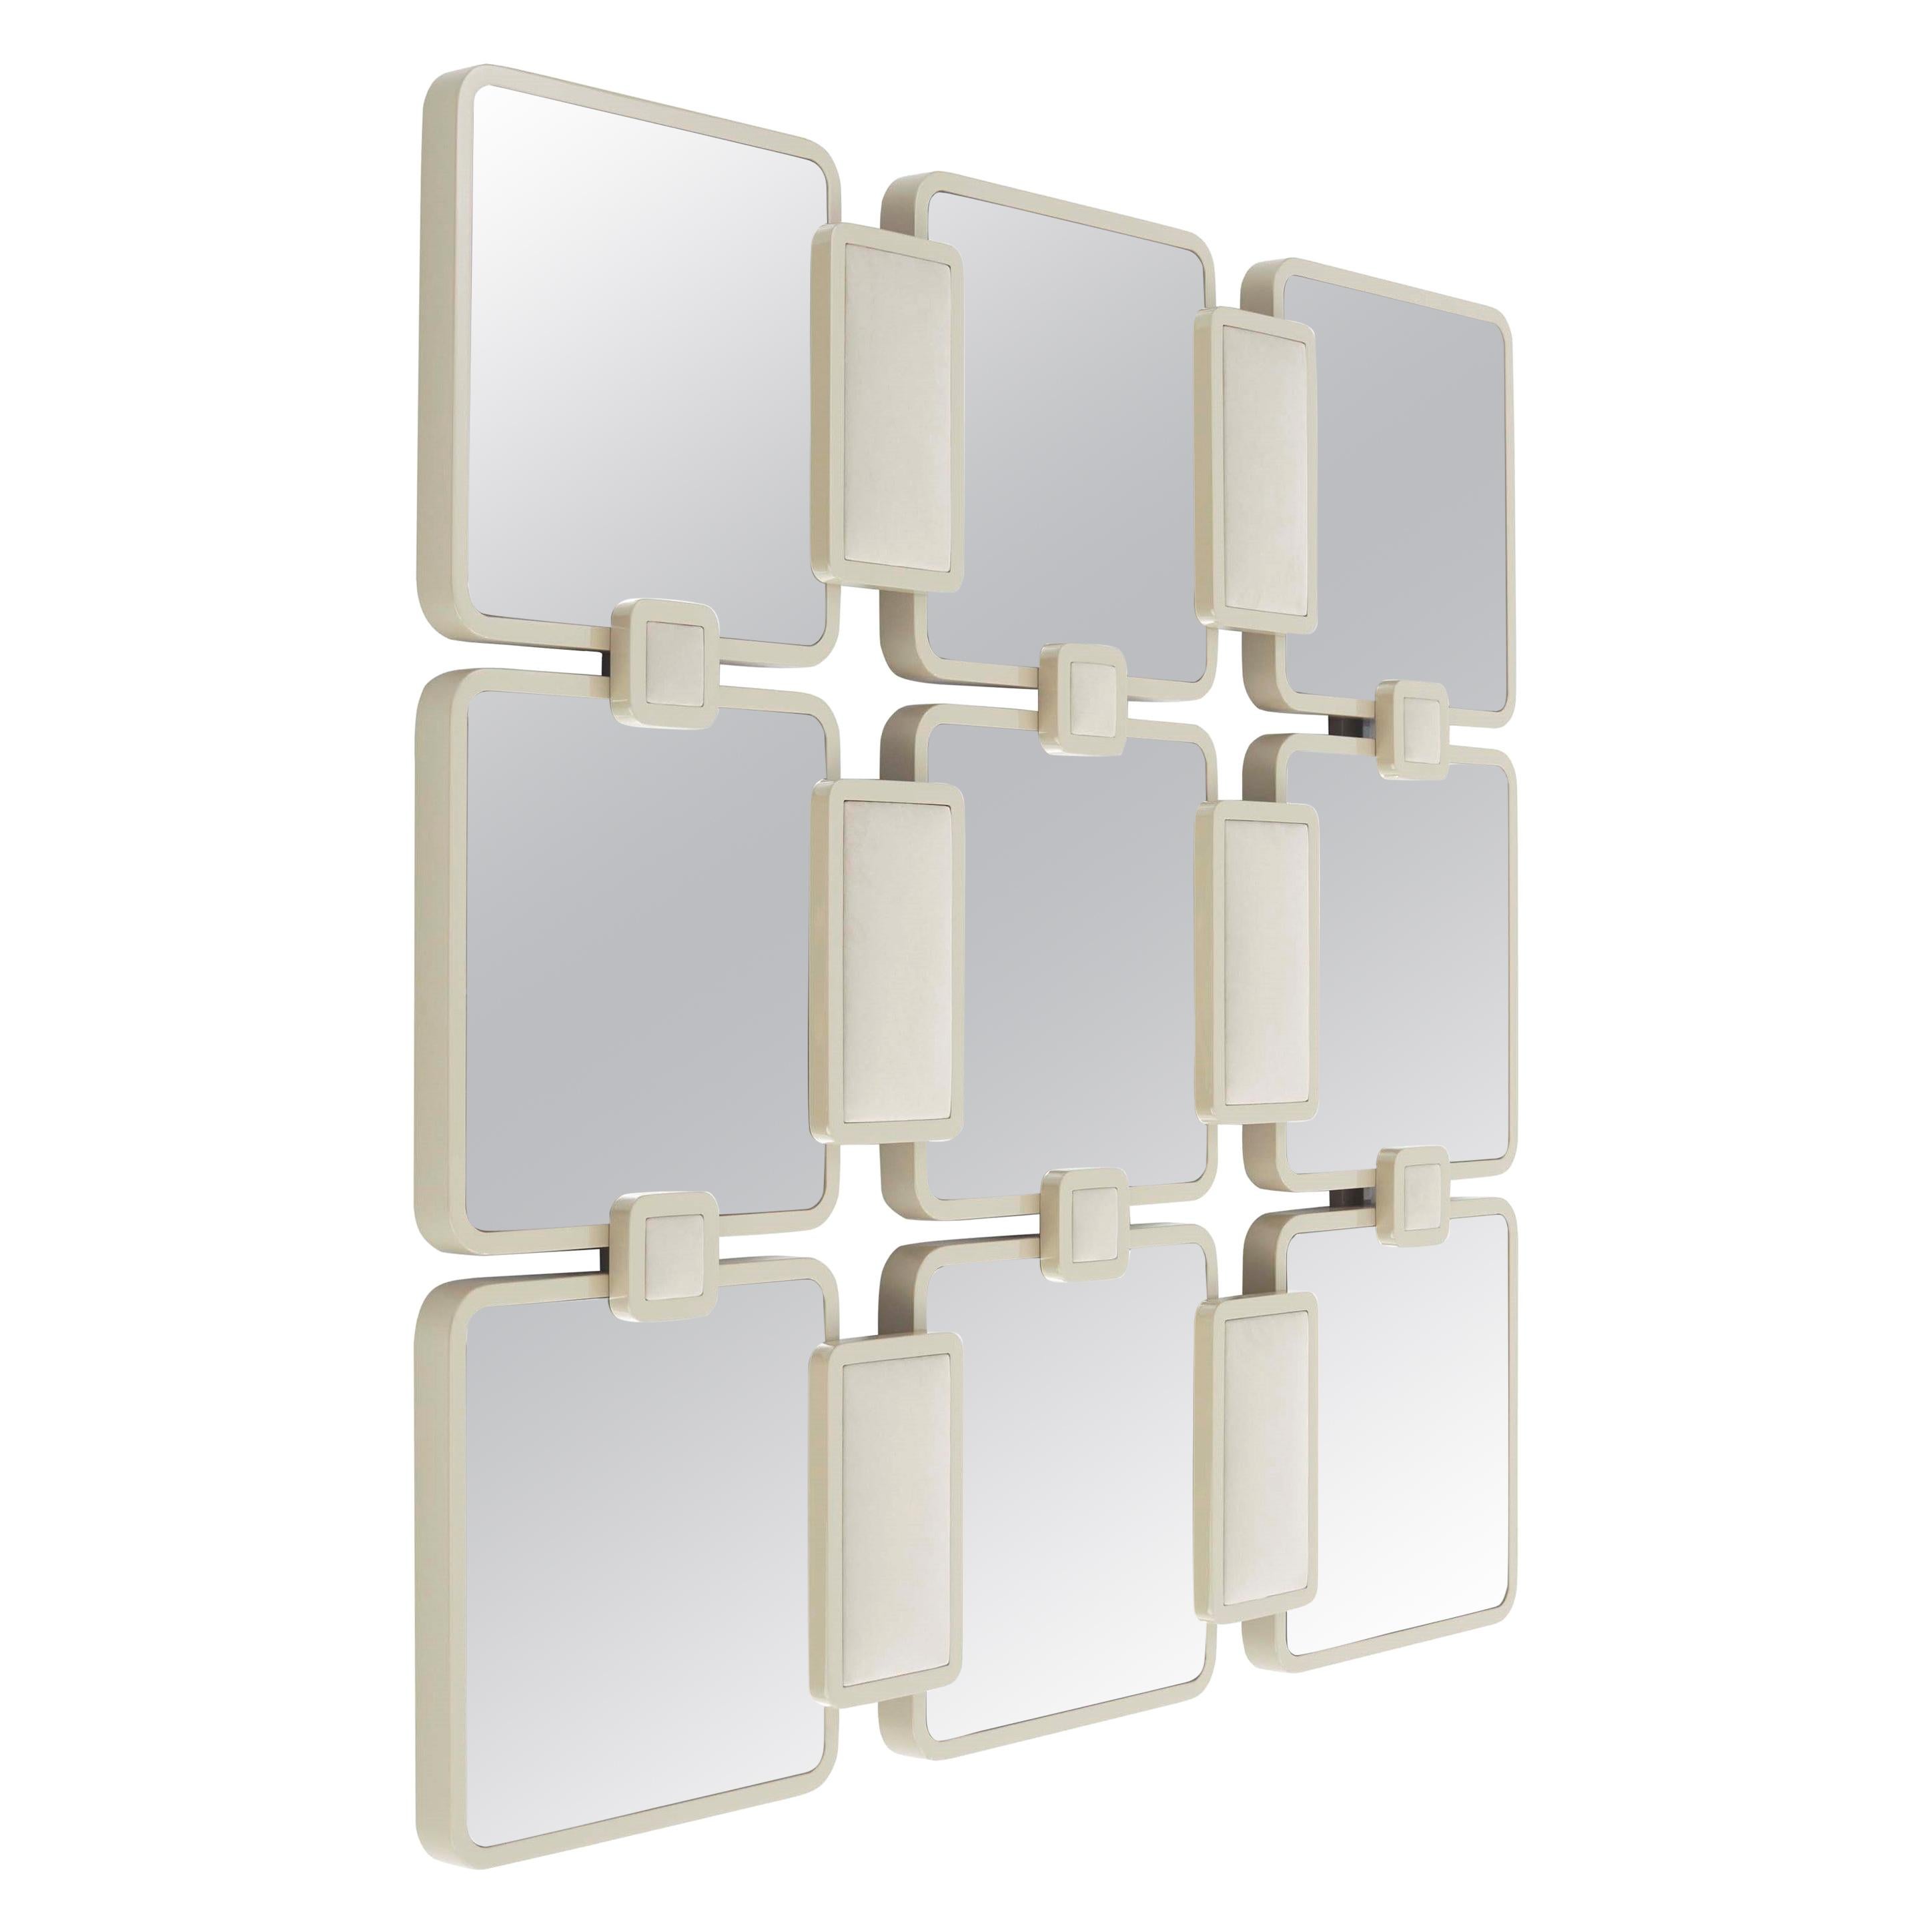 IMPETO II mirror with lacquered frame and Upholstered Panels